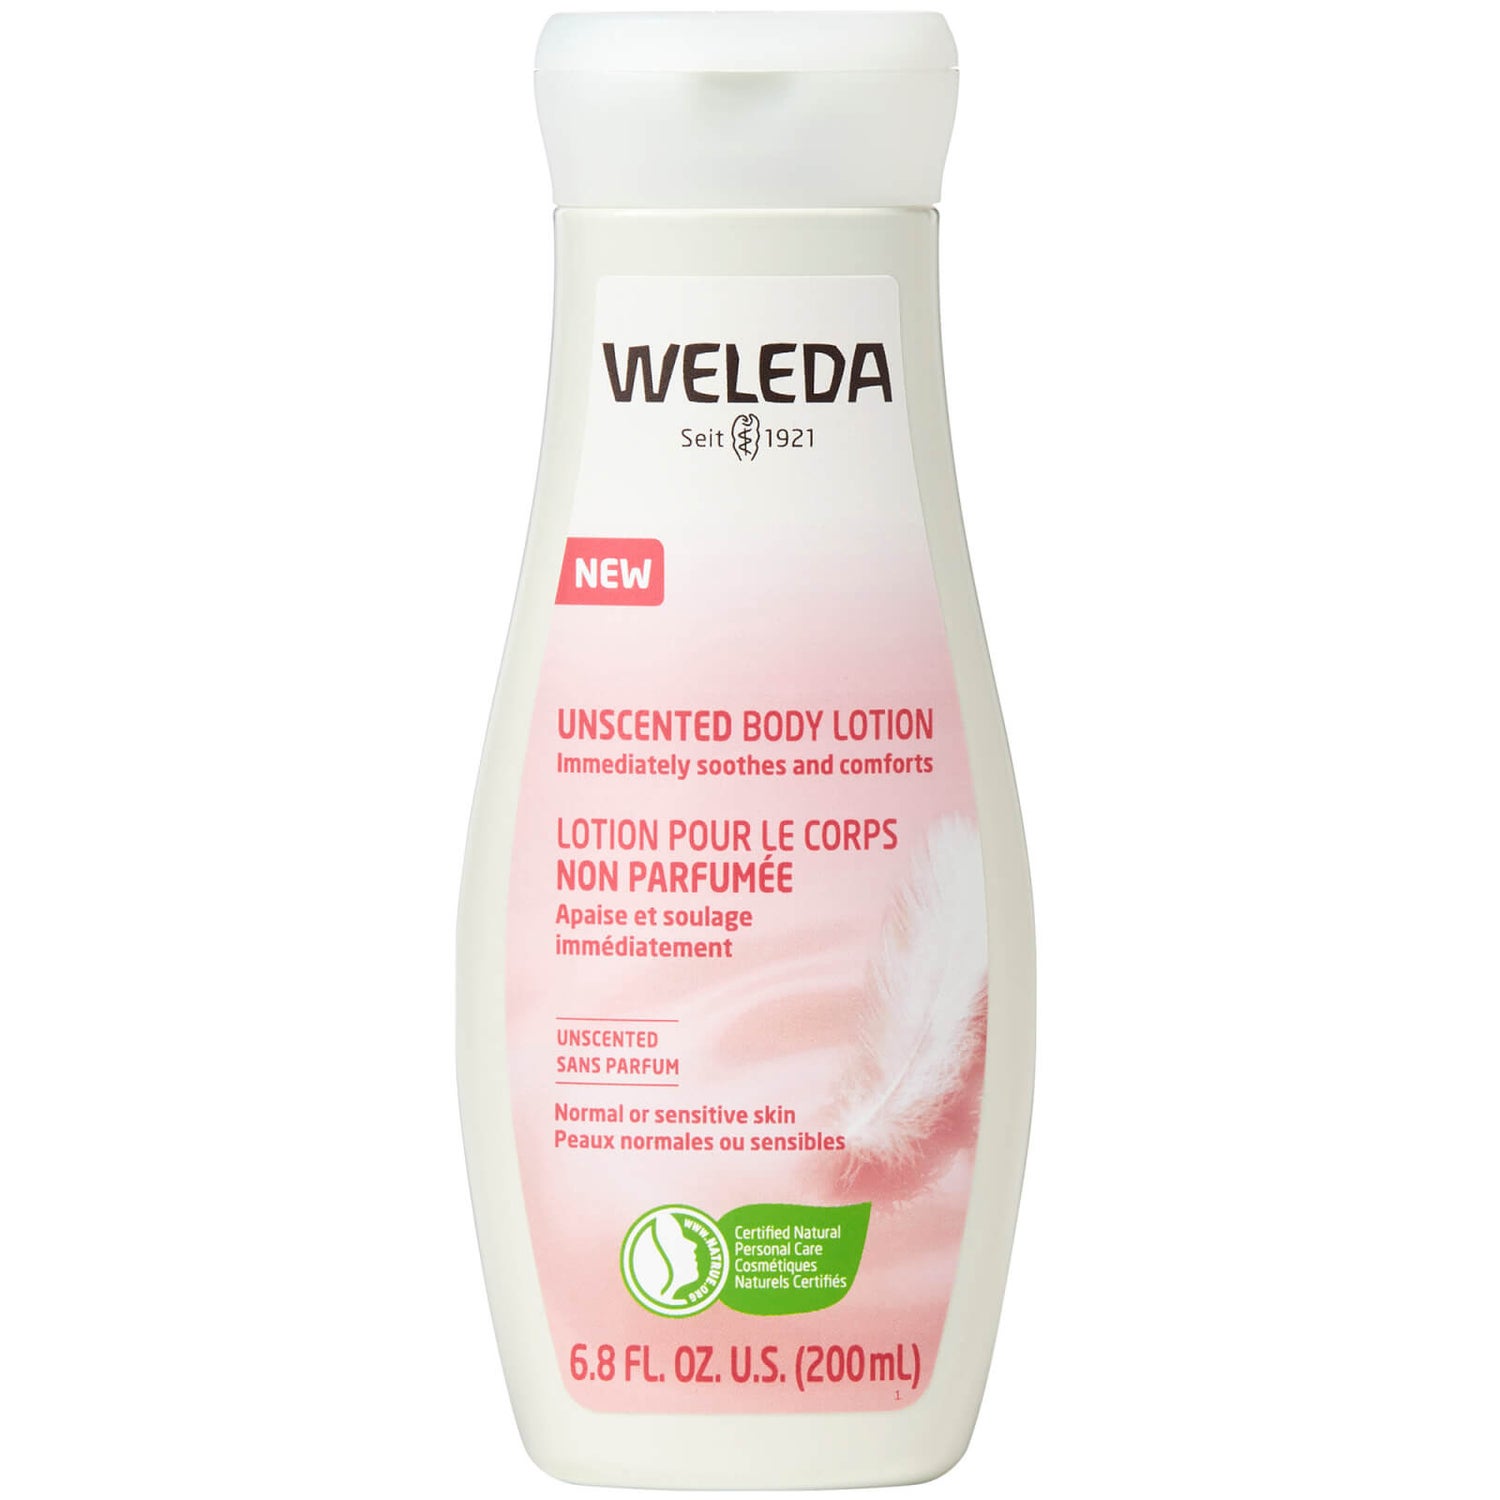 Weleda Unscented Body Lotion